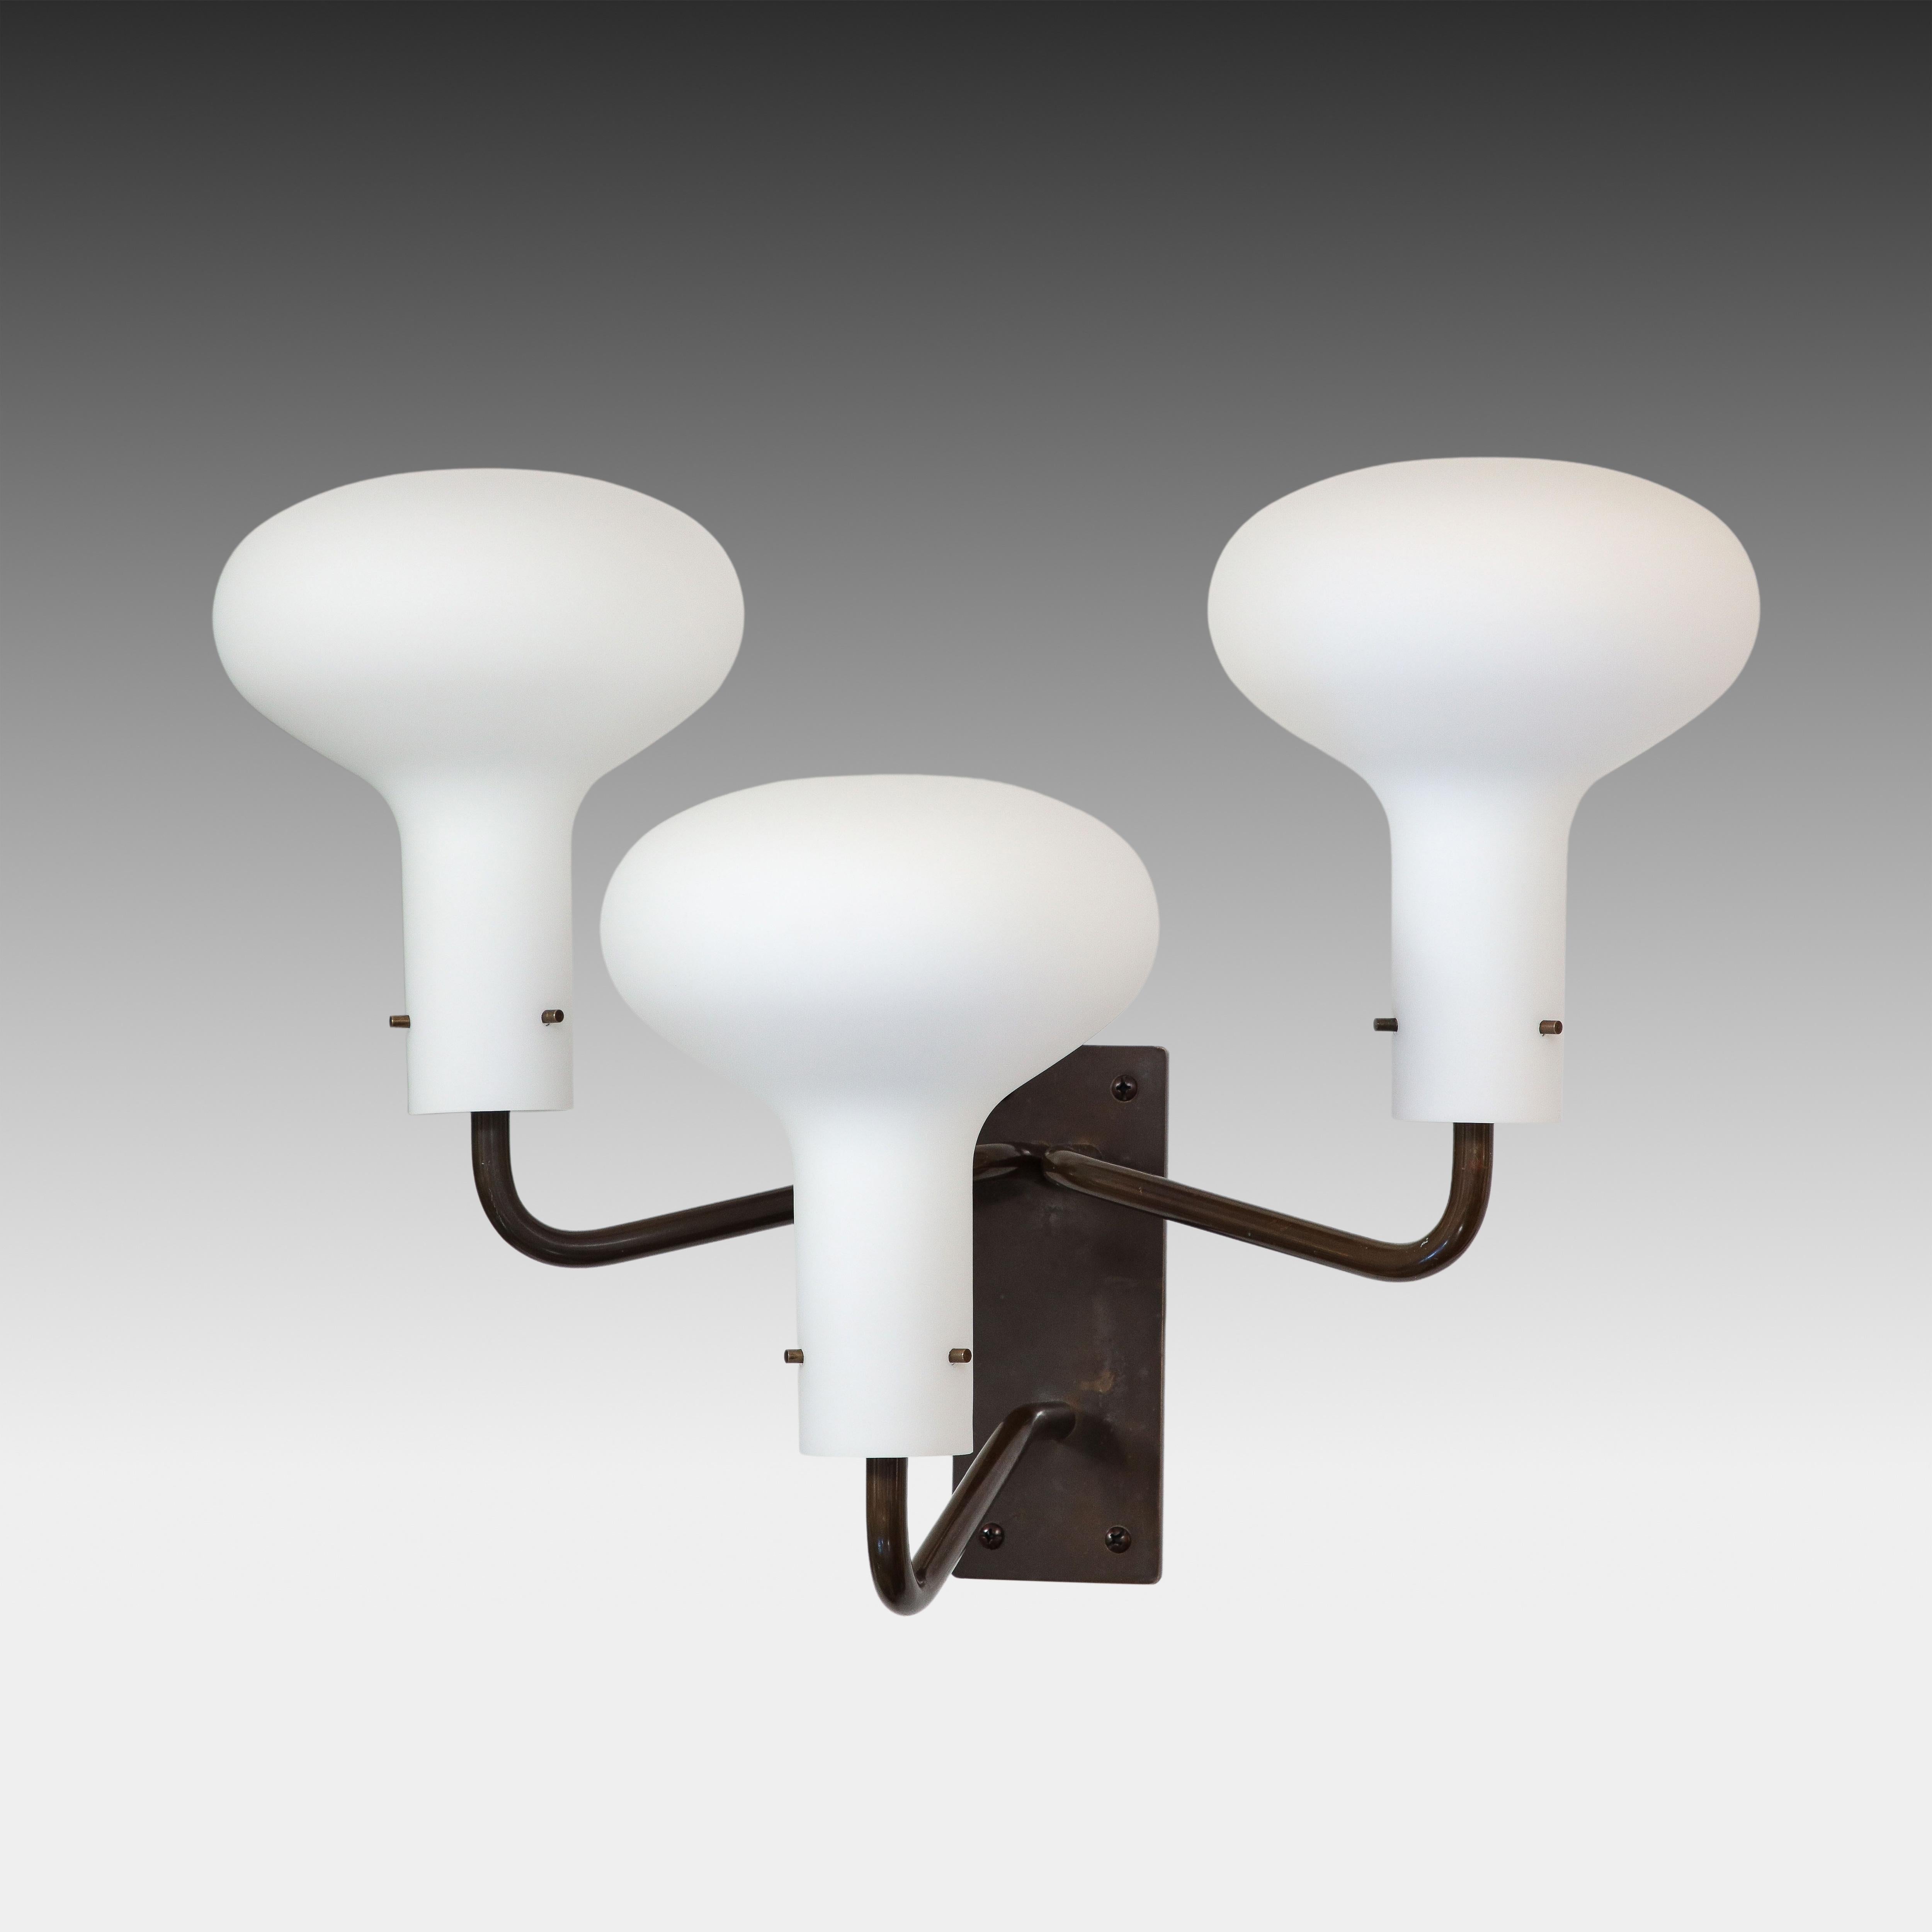 Ignazio Gardella for Azucena Pair of Three Arm Wall Lights Model LP12, 1950s For Sale 1